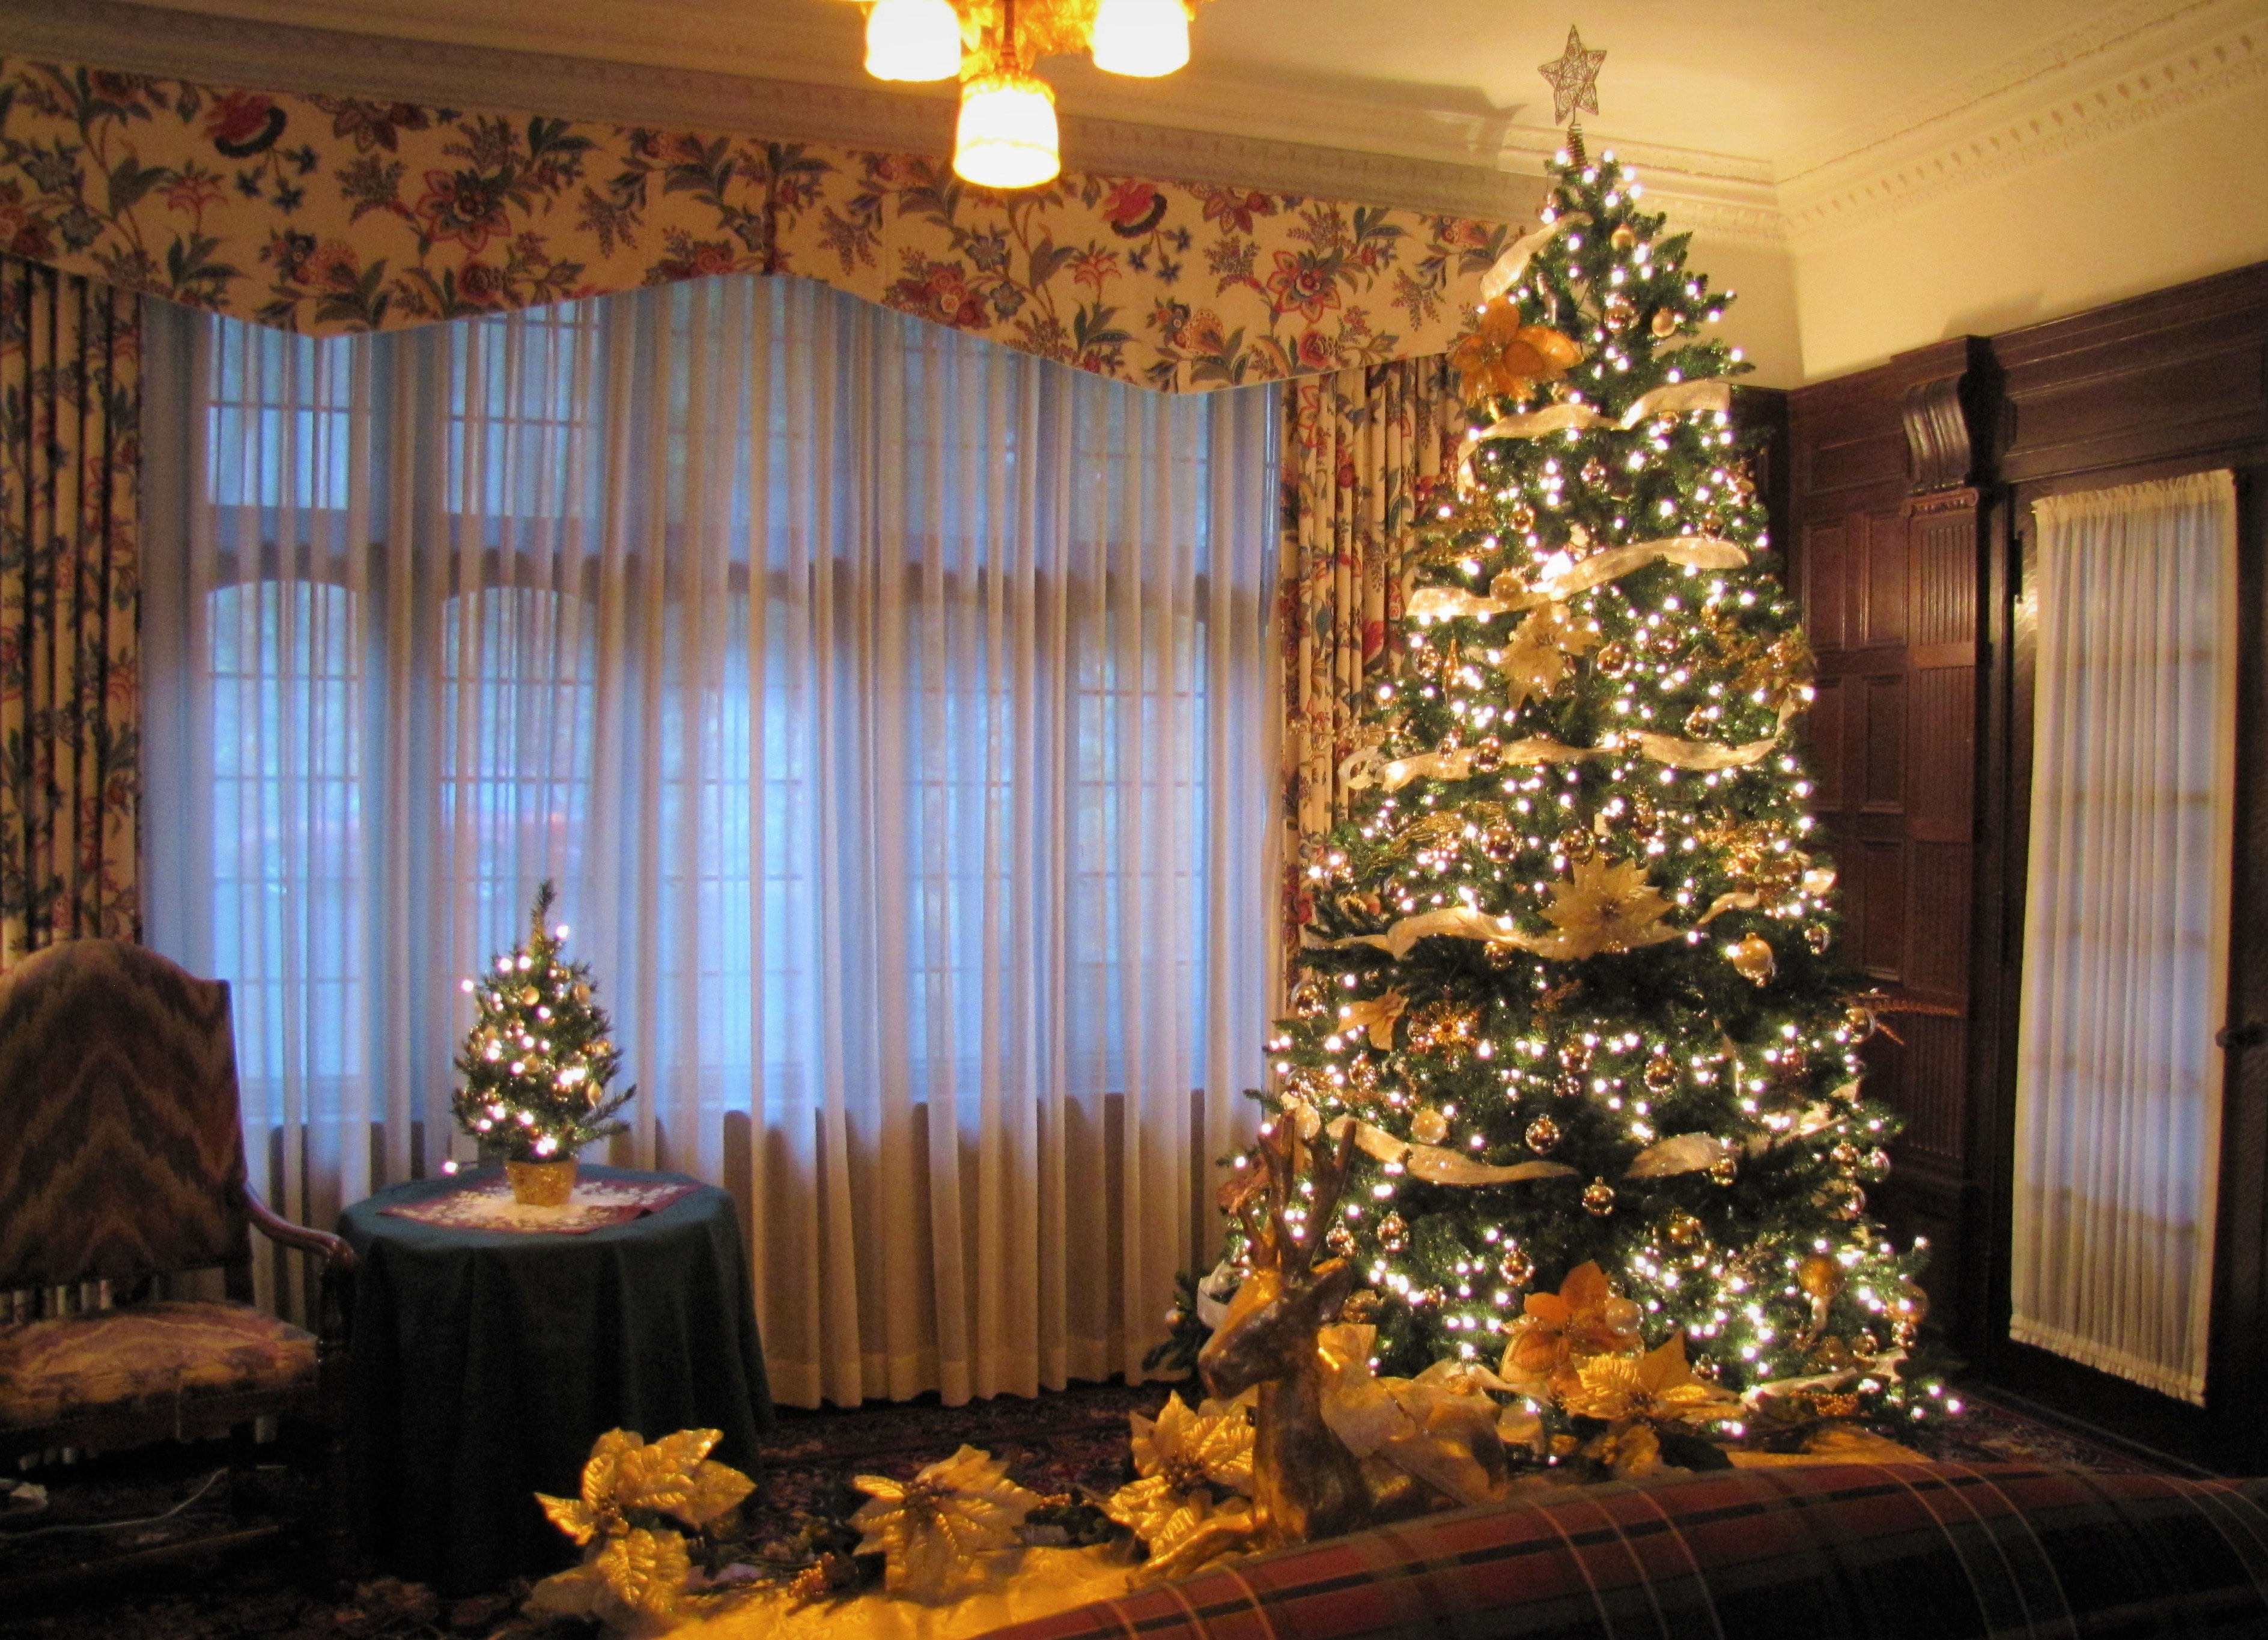 Enjoy the beautiful holiday decorations during the Christmas Open House at the Olmsted Manor and Retreat Center in Ludlow, PA., on Dec. 1 and 8, 2019.